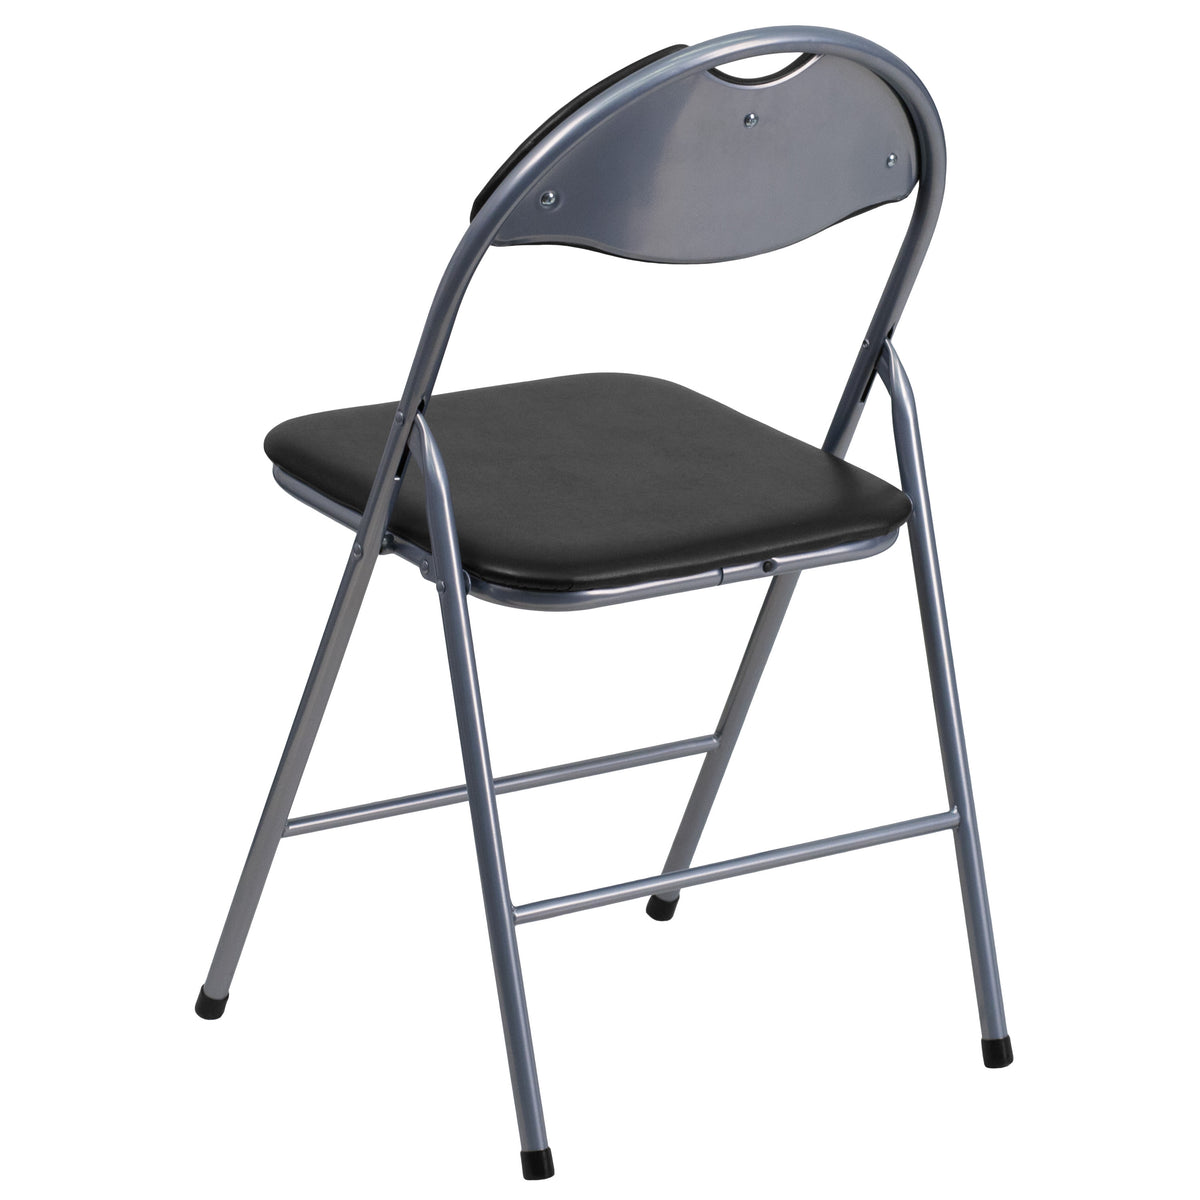 300 lb. Capacity Black Vinyl Metal Folding Chair with Carrying Handle